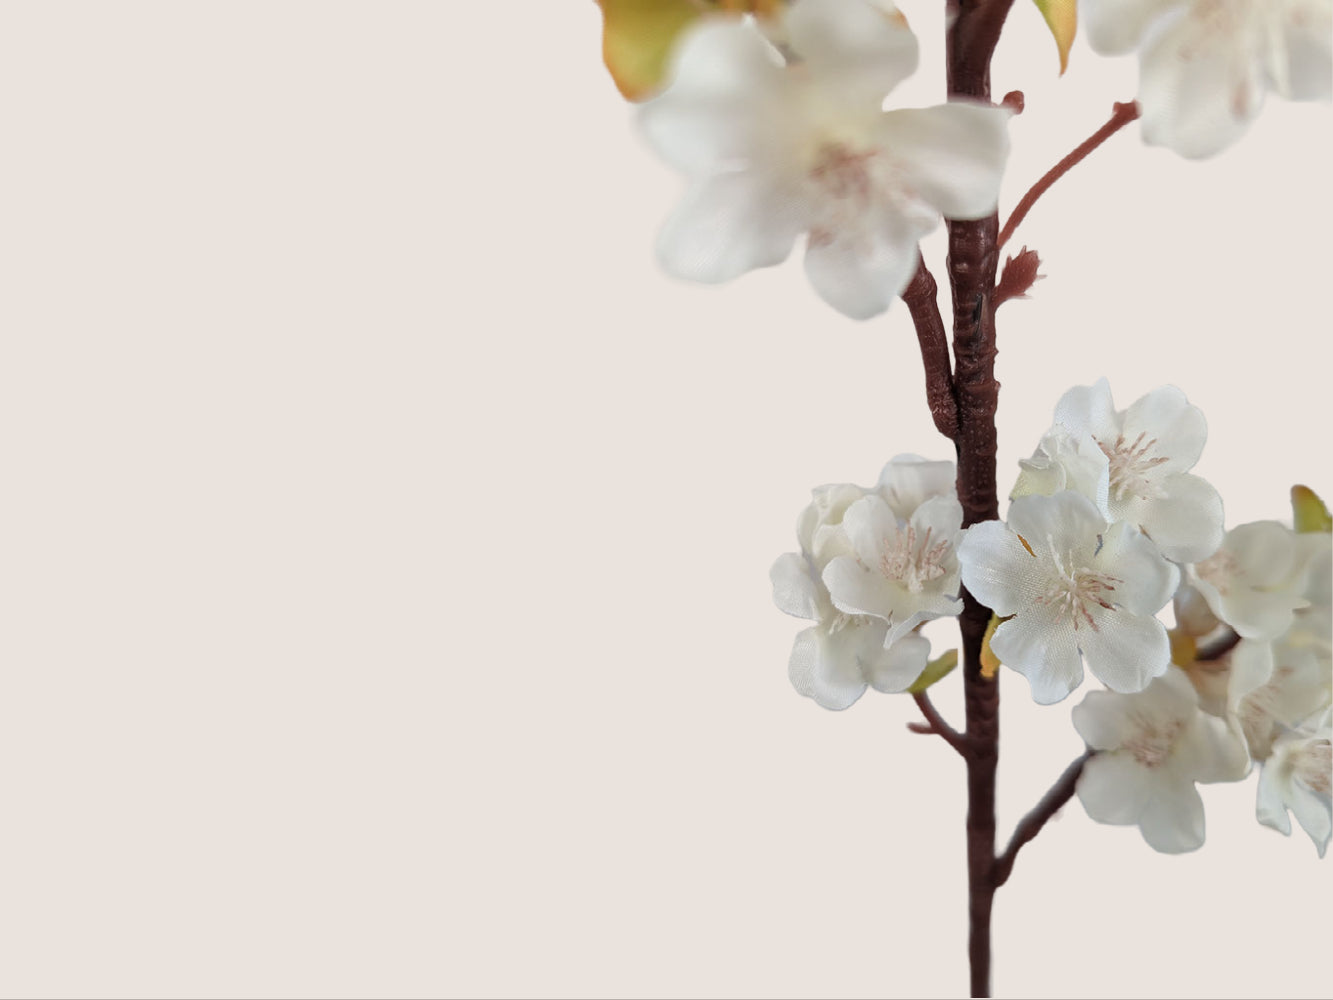 Close up of cream-colored cherry blossom stem against a beige background. The 40-inch stem features three branches with light green buds and brown lifelike stems. Mauve and pink stamens add to the realistic appearance of the artificial flowers.